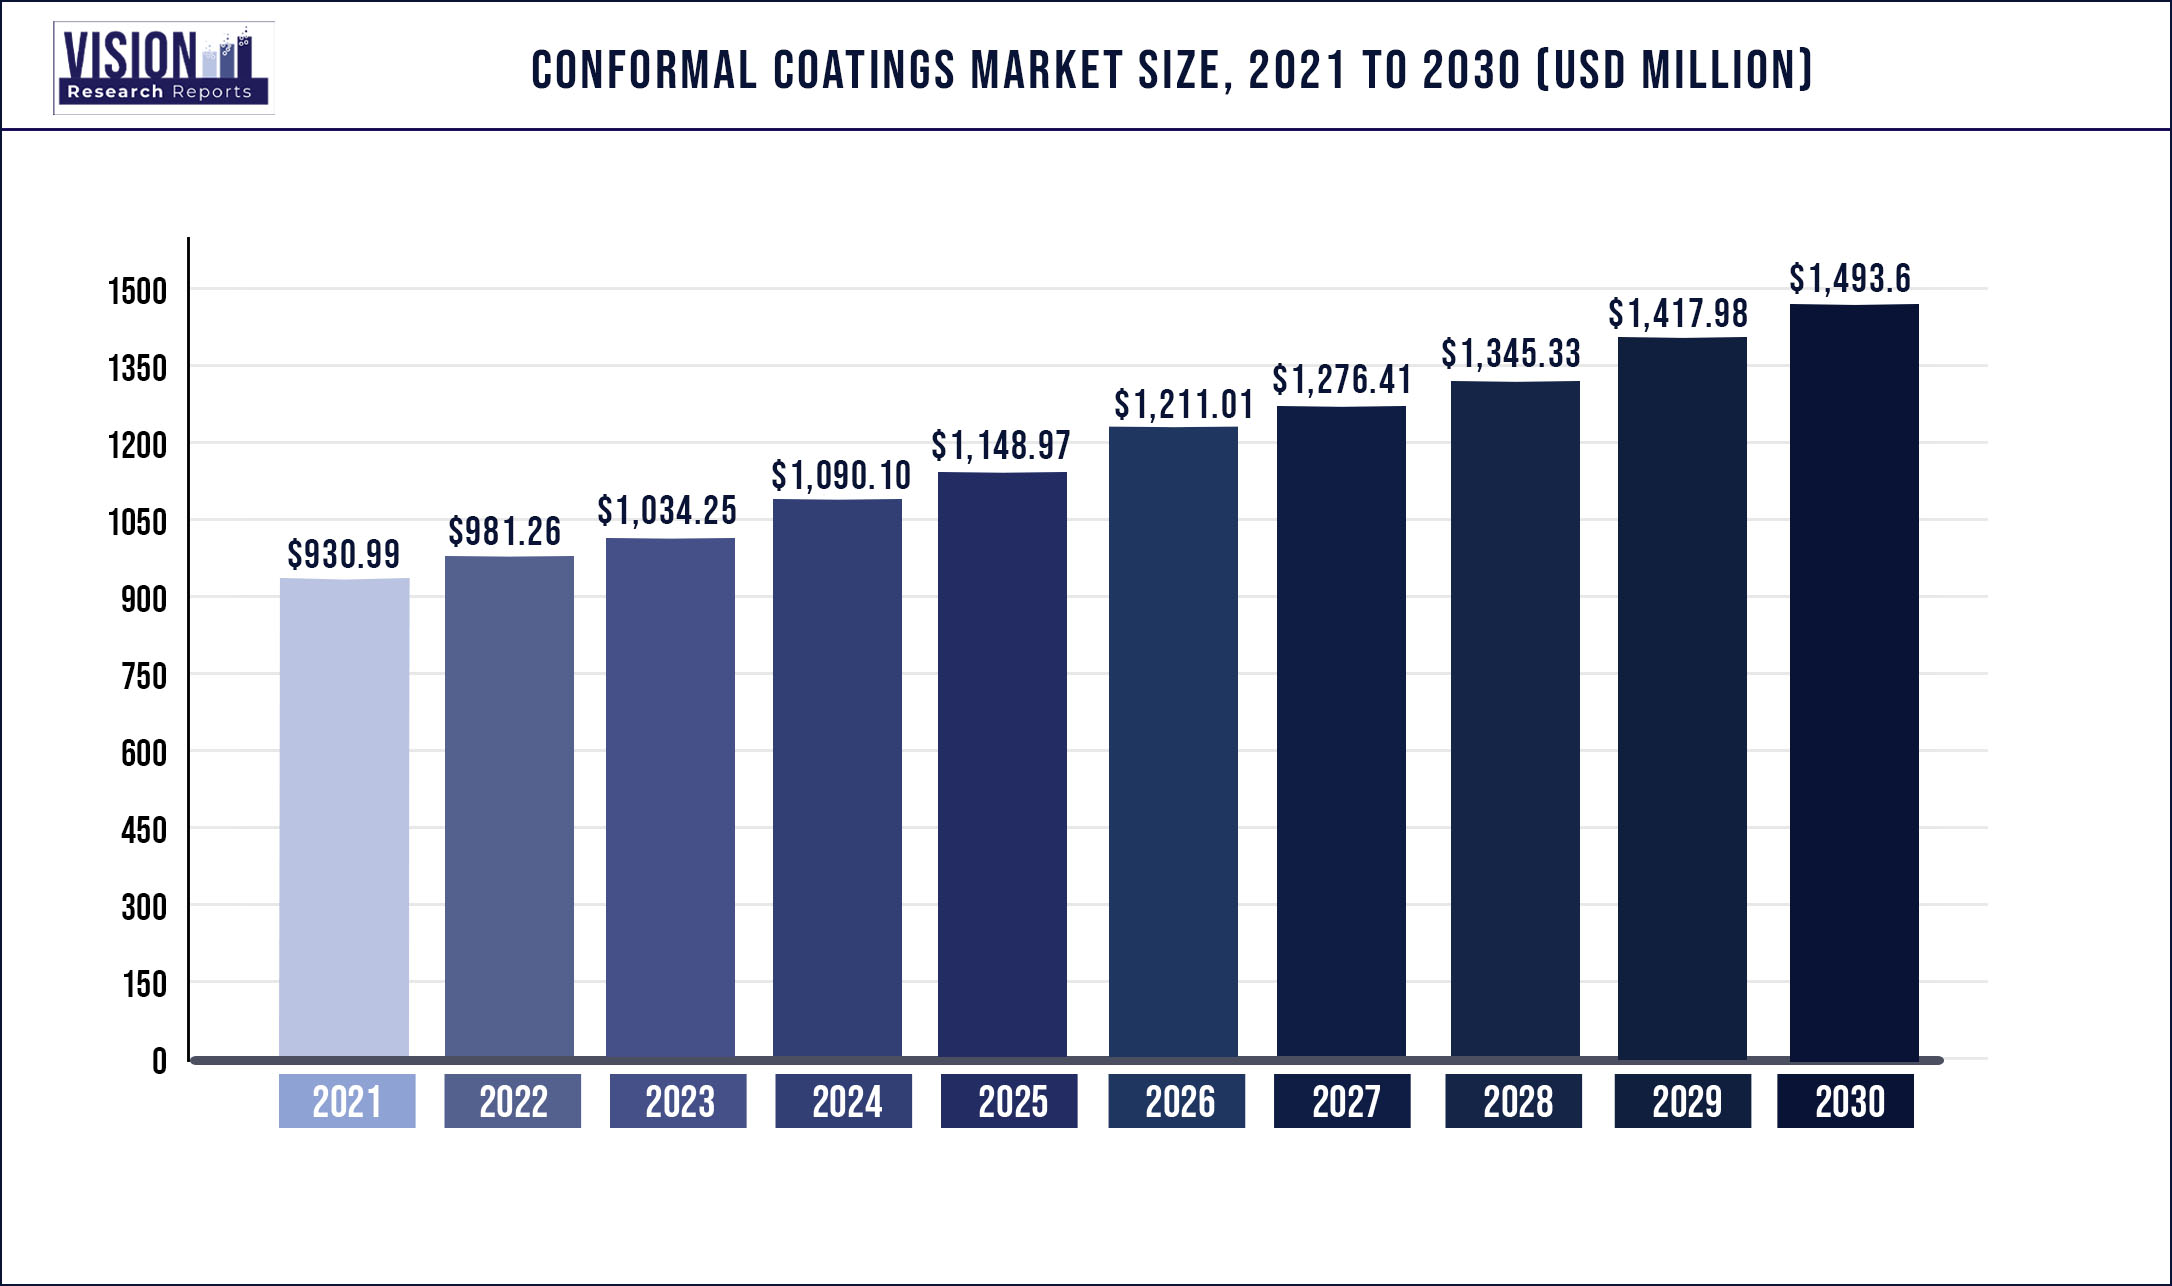 Conformal Coatings Market Size 2021 to 2030